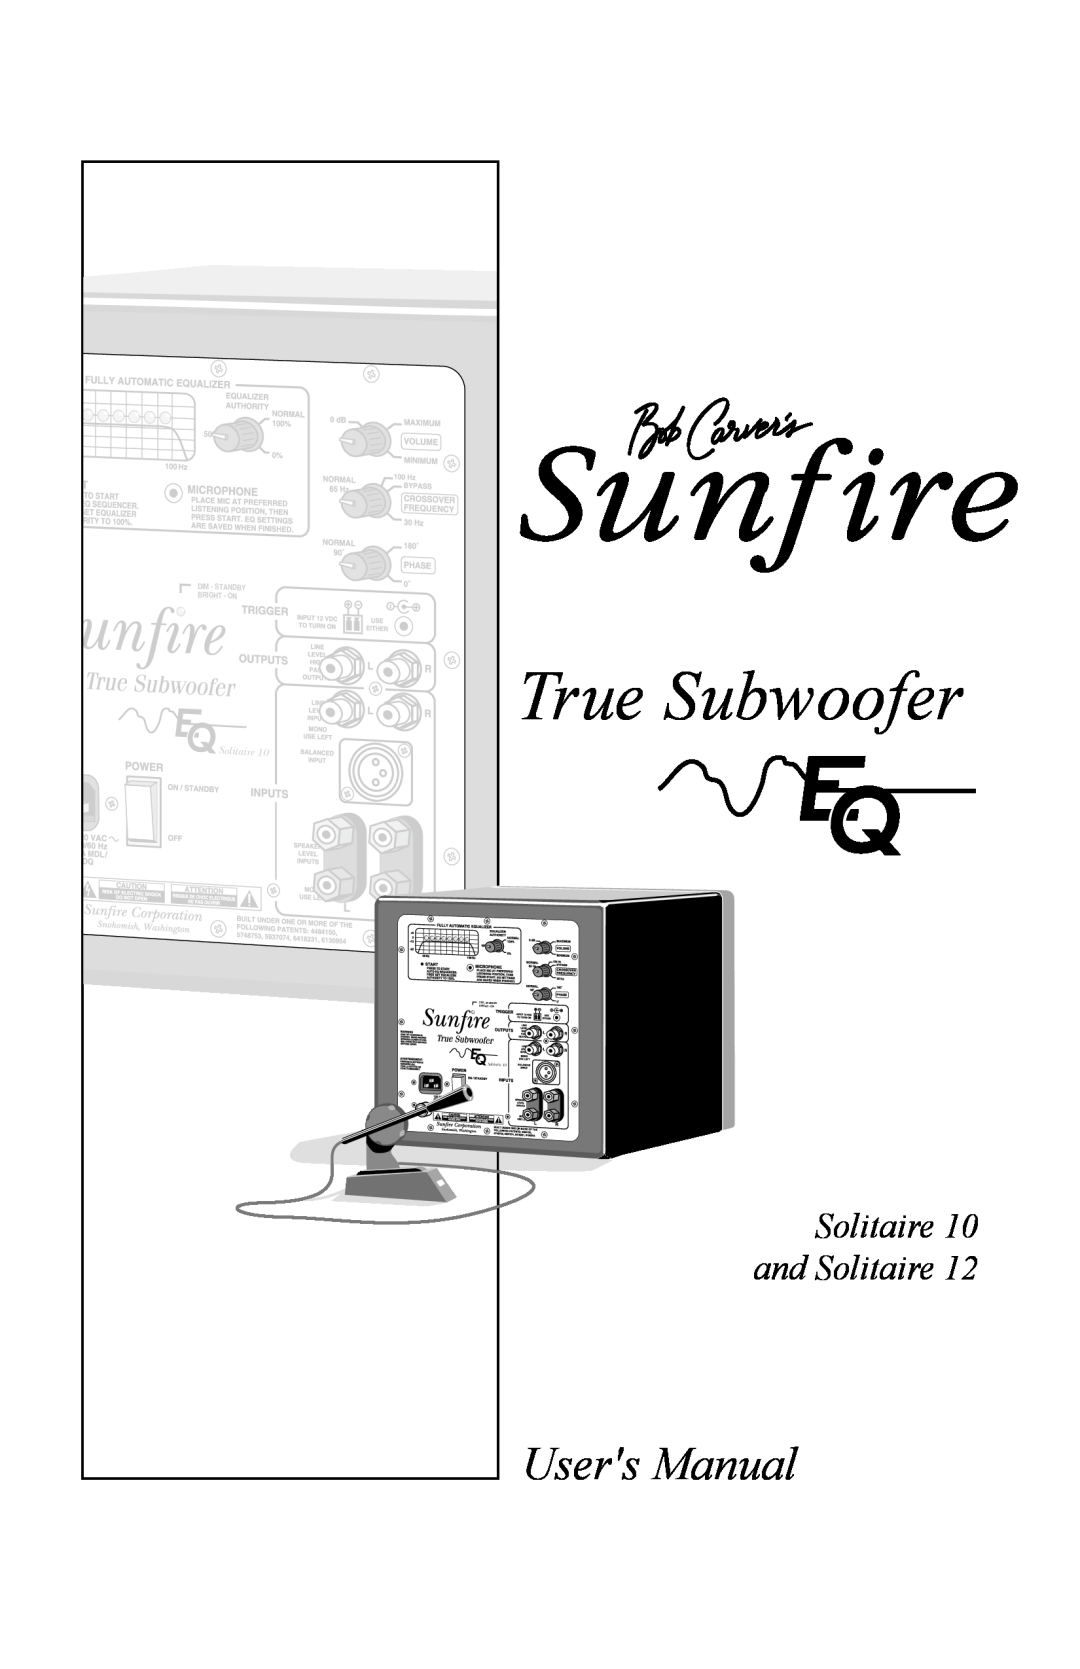 Sunfire 12 user manual True Subwoofer, Solitaire and Solitaire, Dim - Standby, Bright - On 